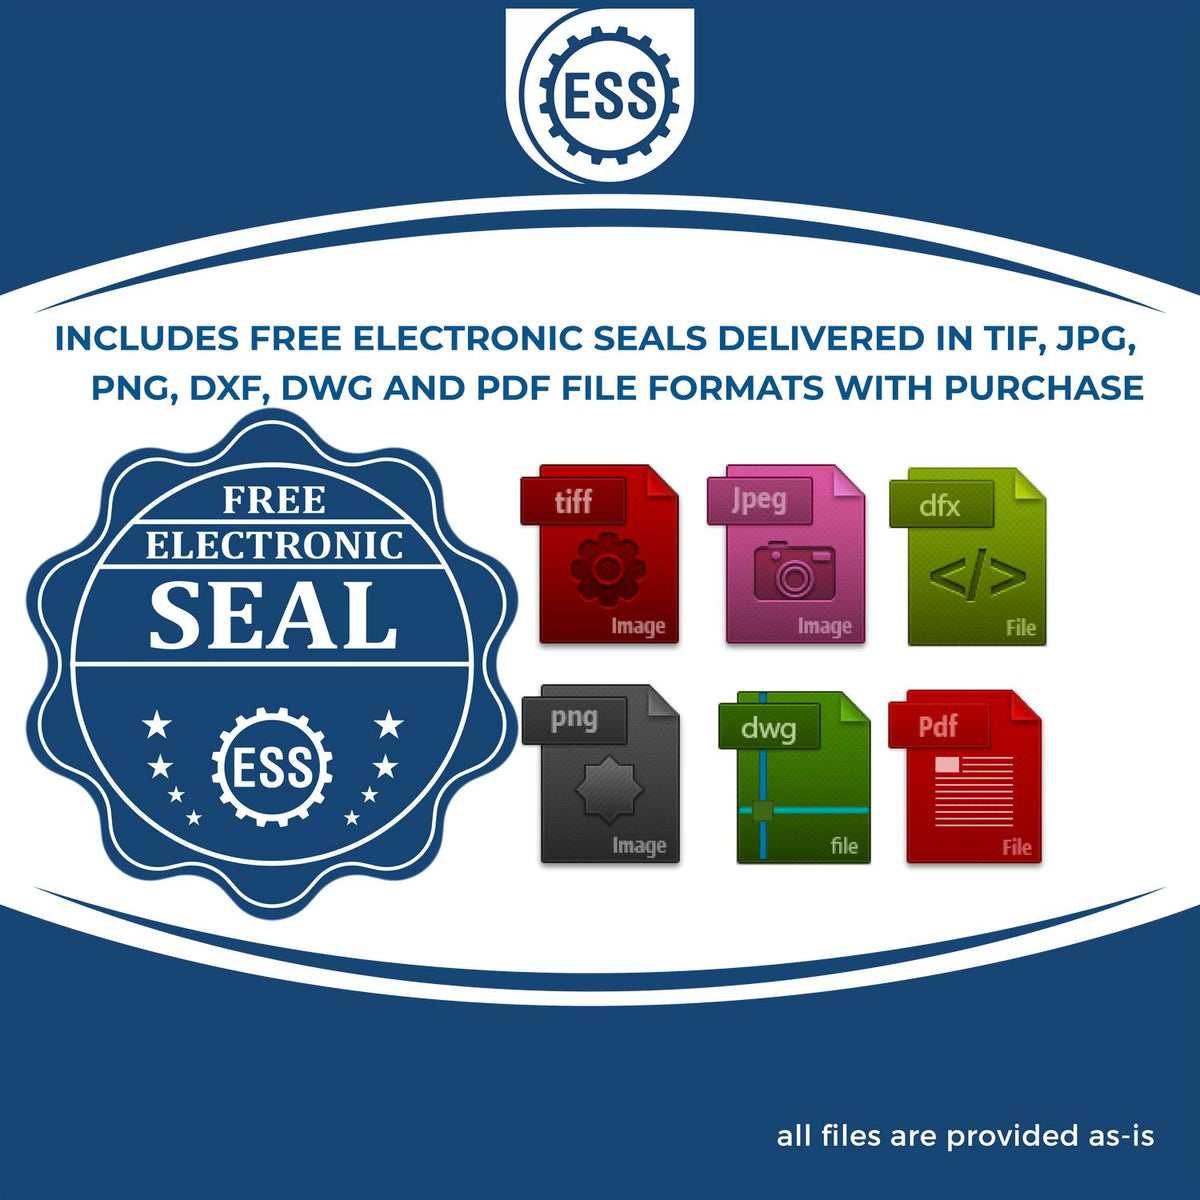 An infographic for the free electronic seal for the Hybrid Massachusetts Geologist Seal illustrating the different file type icons such as DXF, DWG, TIF, JPG and PNG.